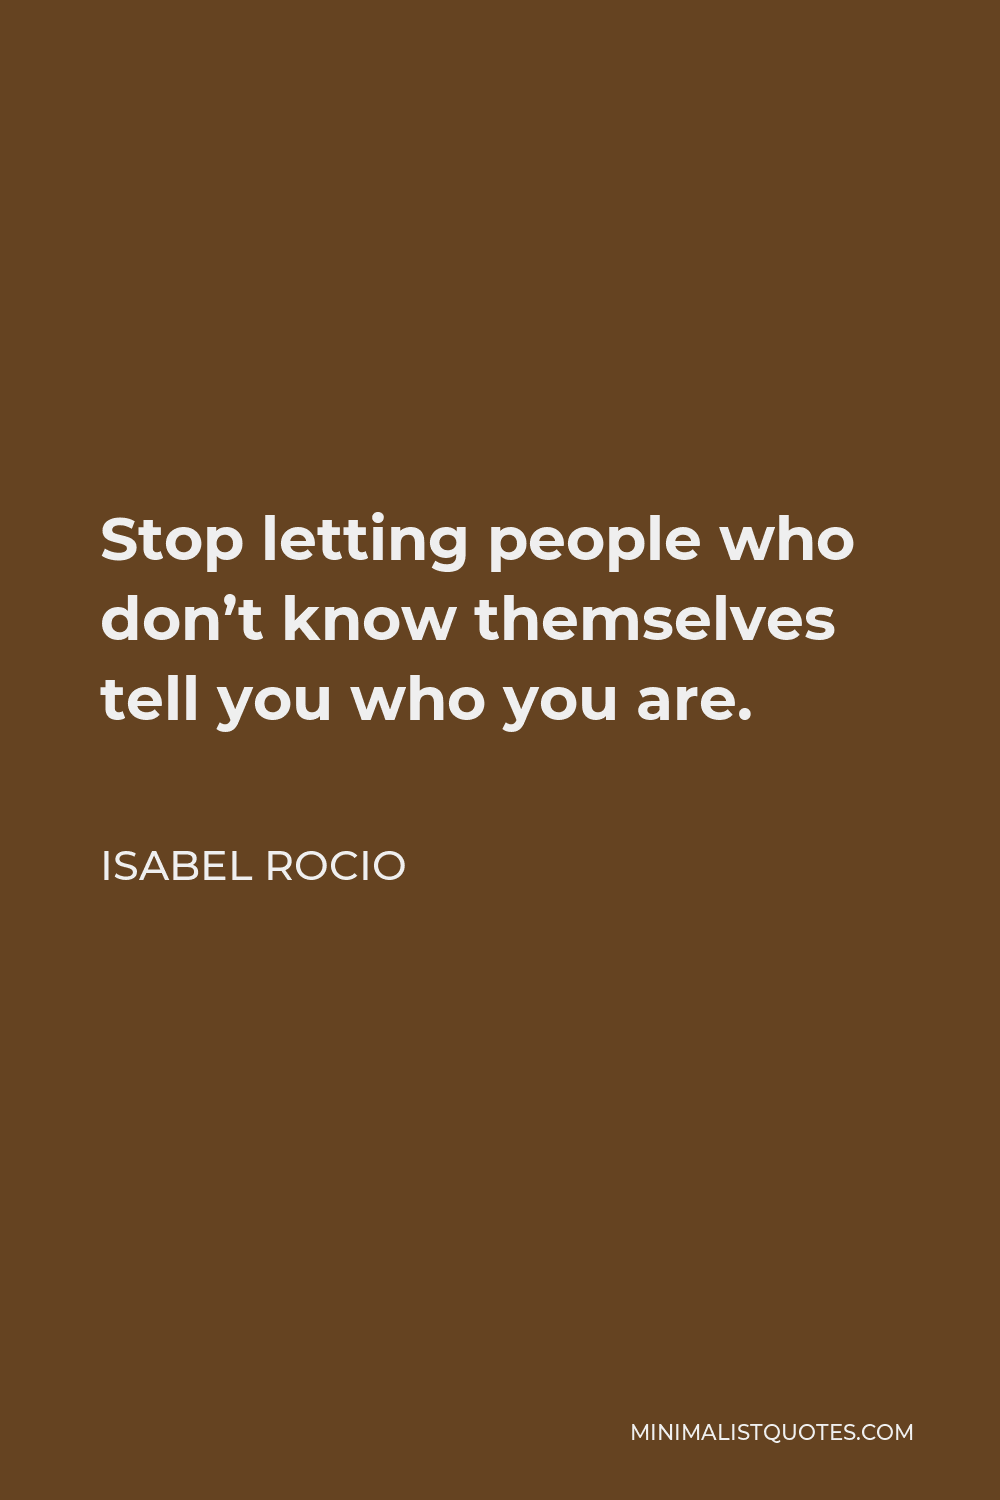 Isabel Rocio Quote - Stop letting people who don’t know themselves tell you who you are.